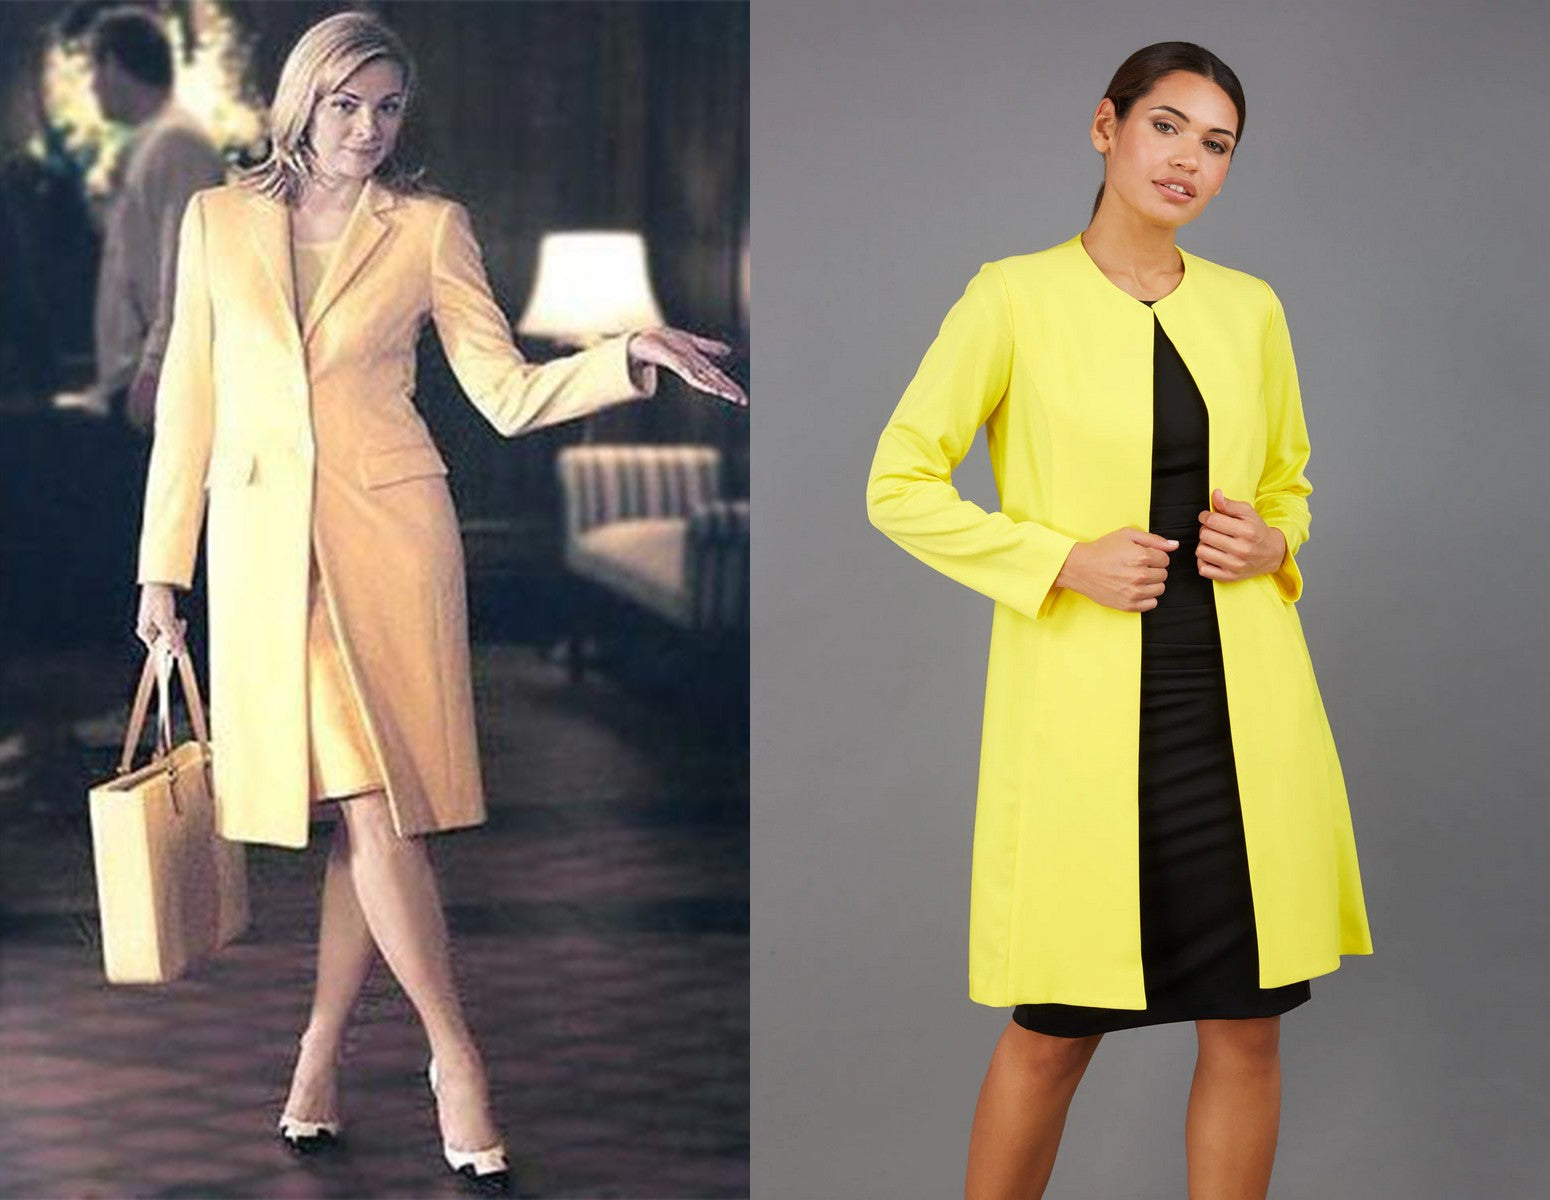 Sam Jones pictured in a bright yellow statement coat - attached coat is from Diva Catwalks' Twilight Long Sleeve Coat.